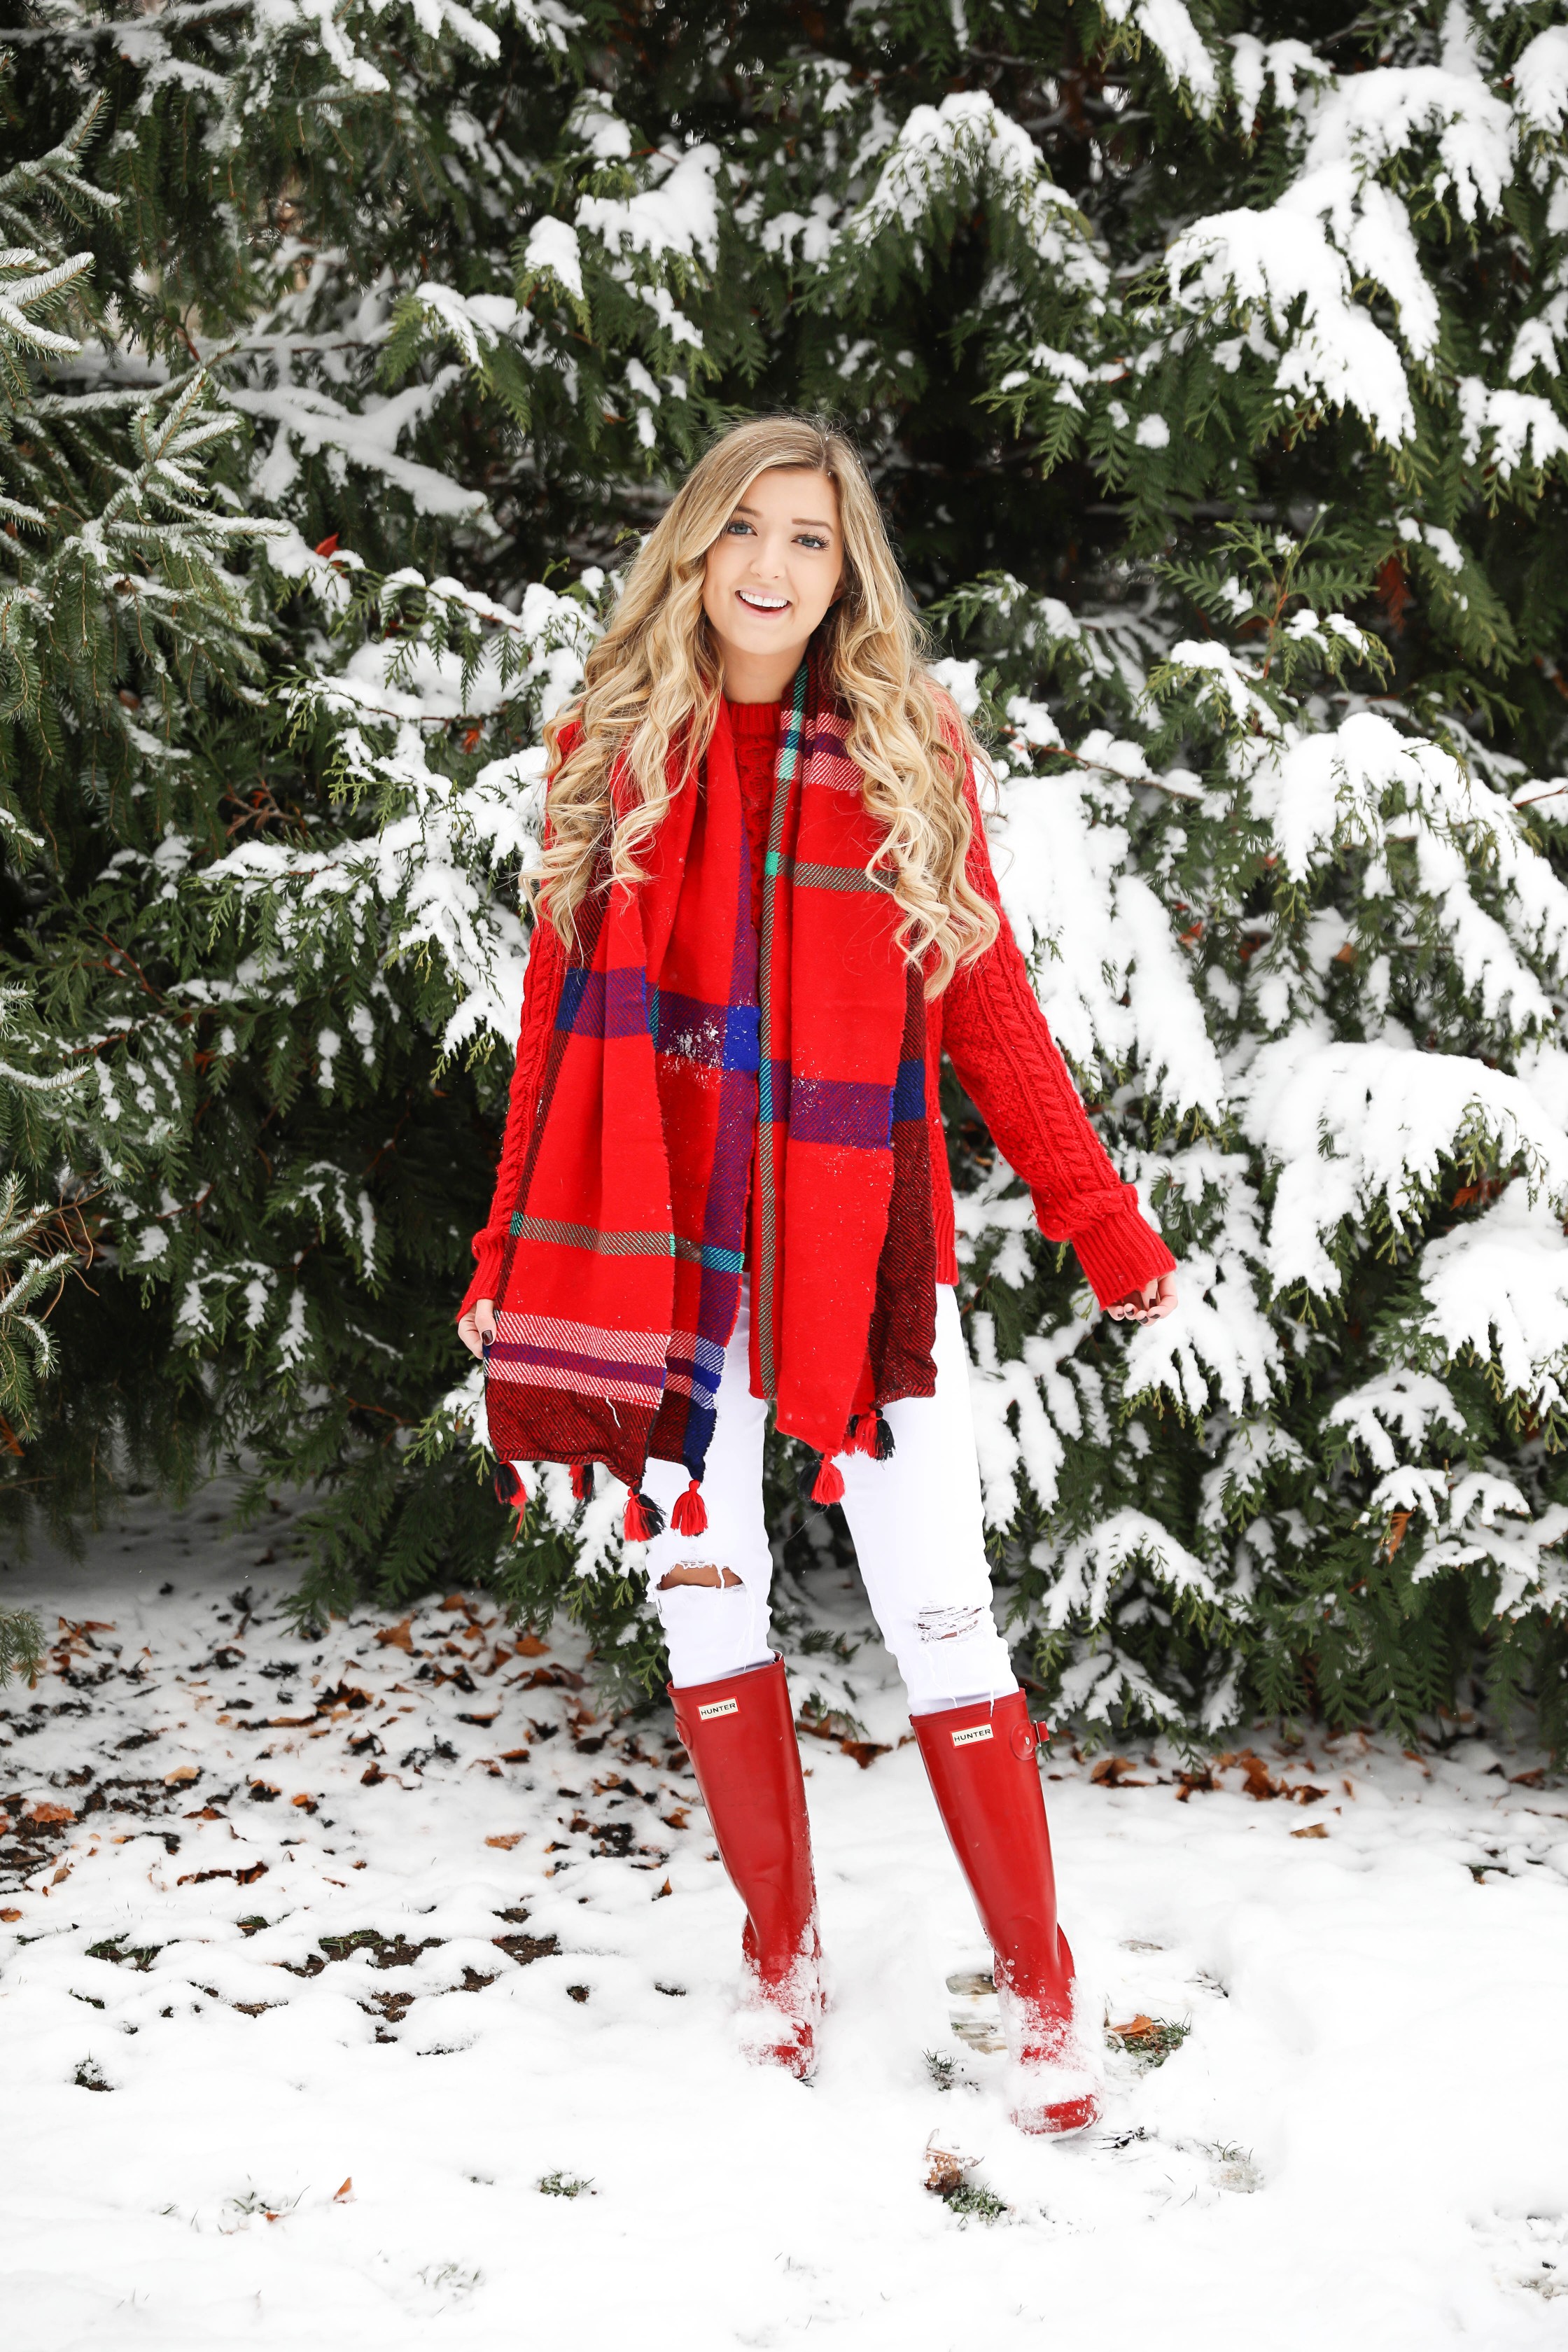 Christmas card photos in the snow! I took my holiday card photos with my cute little white pomeranian. I love when people do their holiday pictures with their dog! This is such a cute winter outfit idea for the holidays! Details on fashion blog daily dose of charm by lauren lindmark